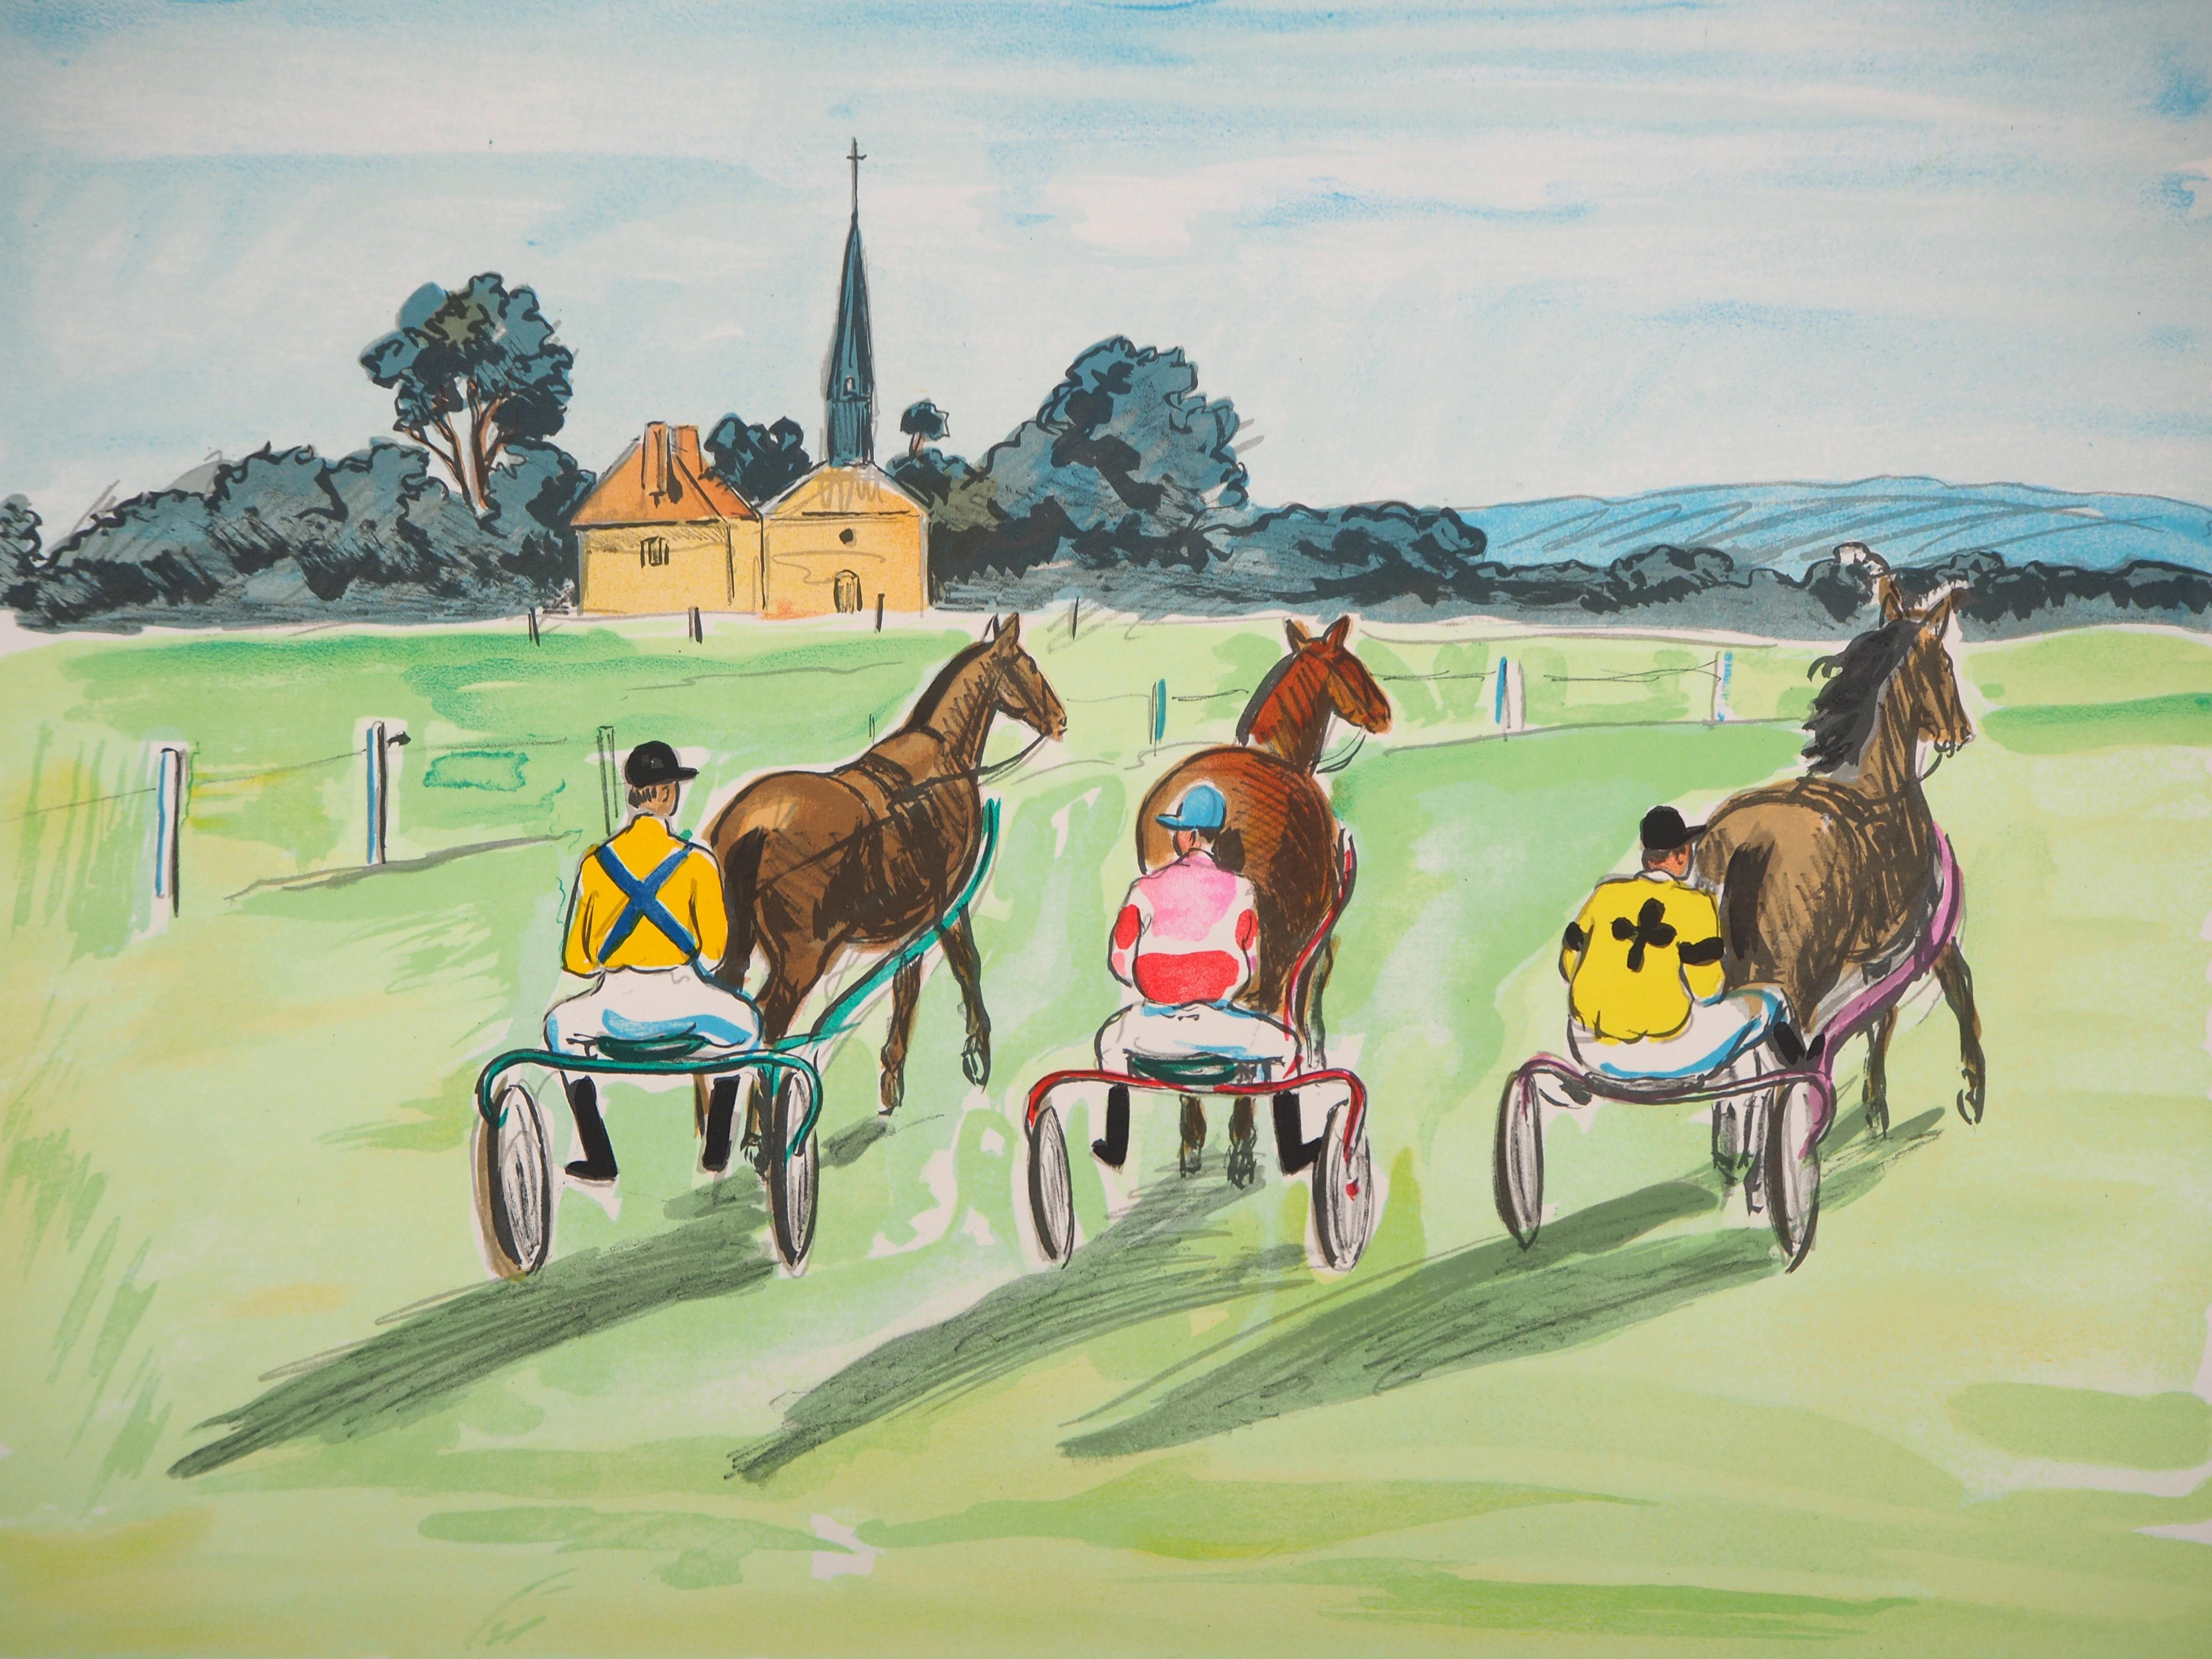 Before the Trotting Race - Original Lithograph Handsigned Numbered - Print by Yves Brayer